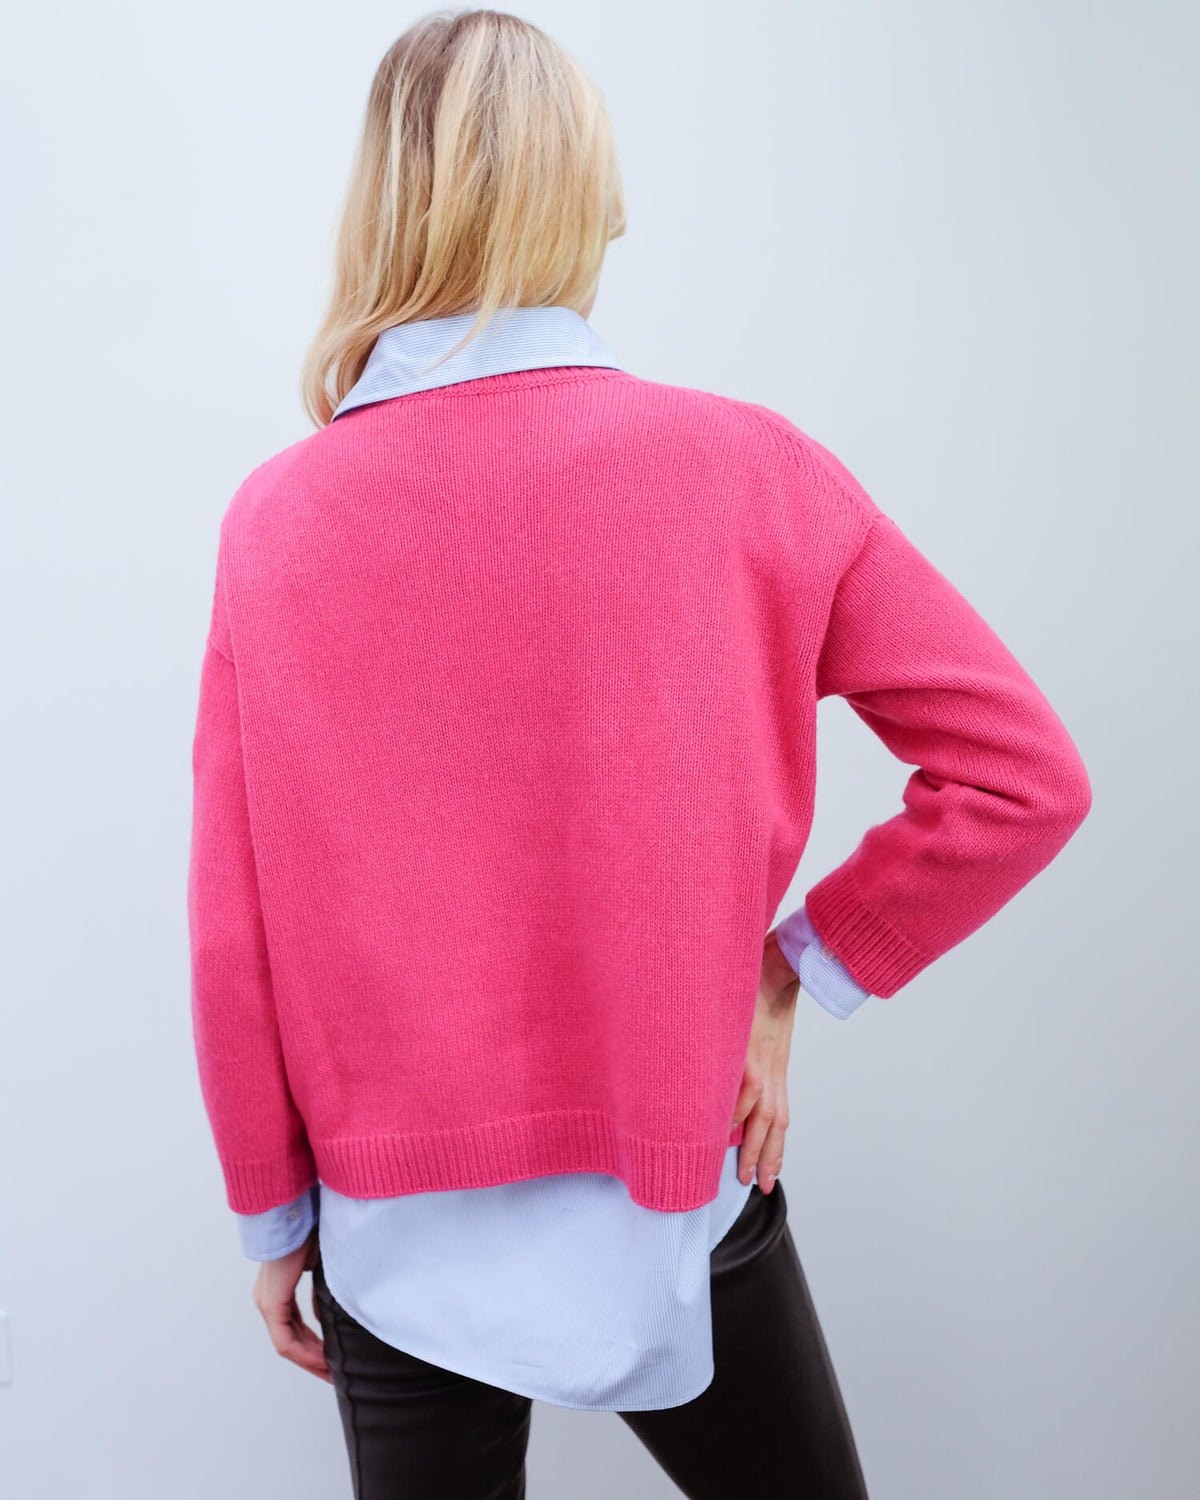 MM Zoraide cashmere knit in red